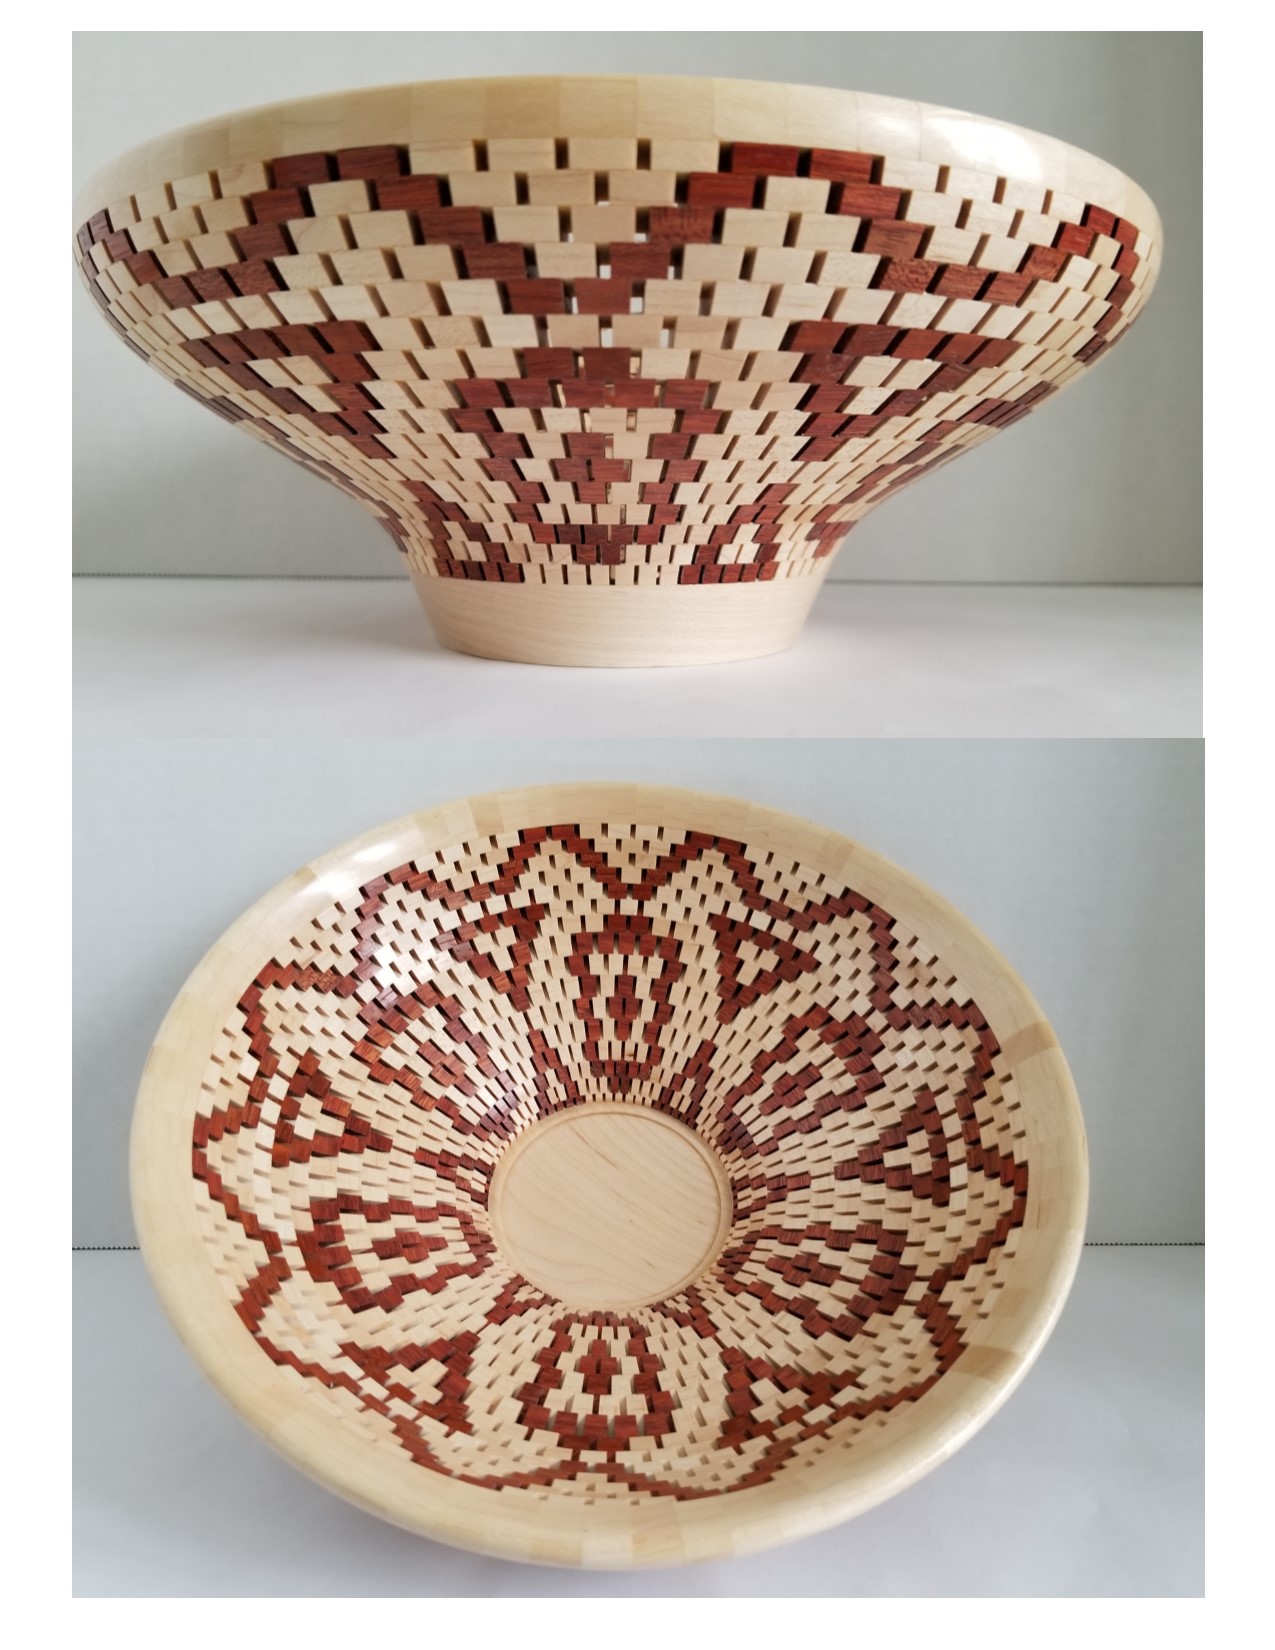 Aztec Influenced Charity Bowl